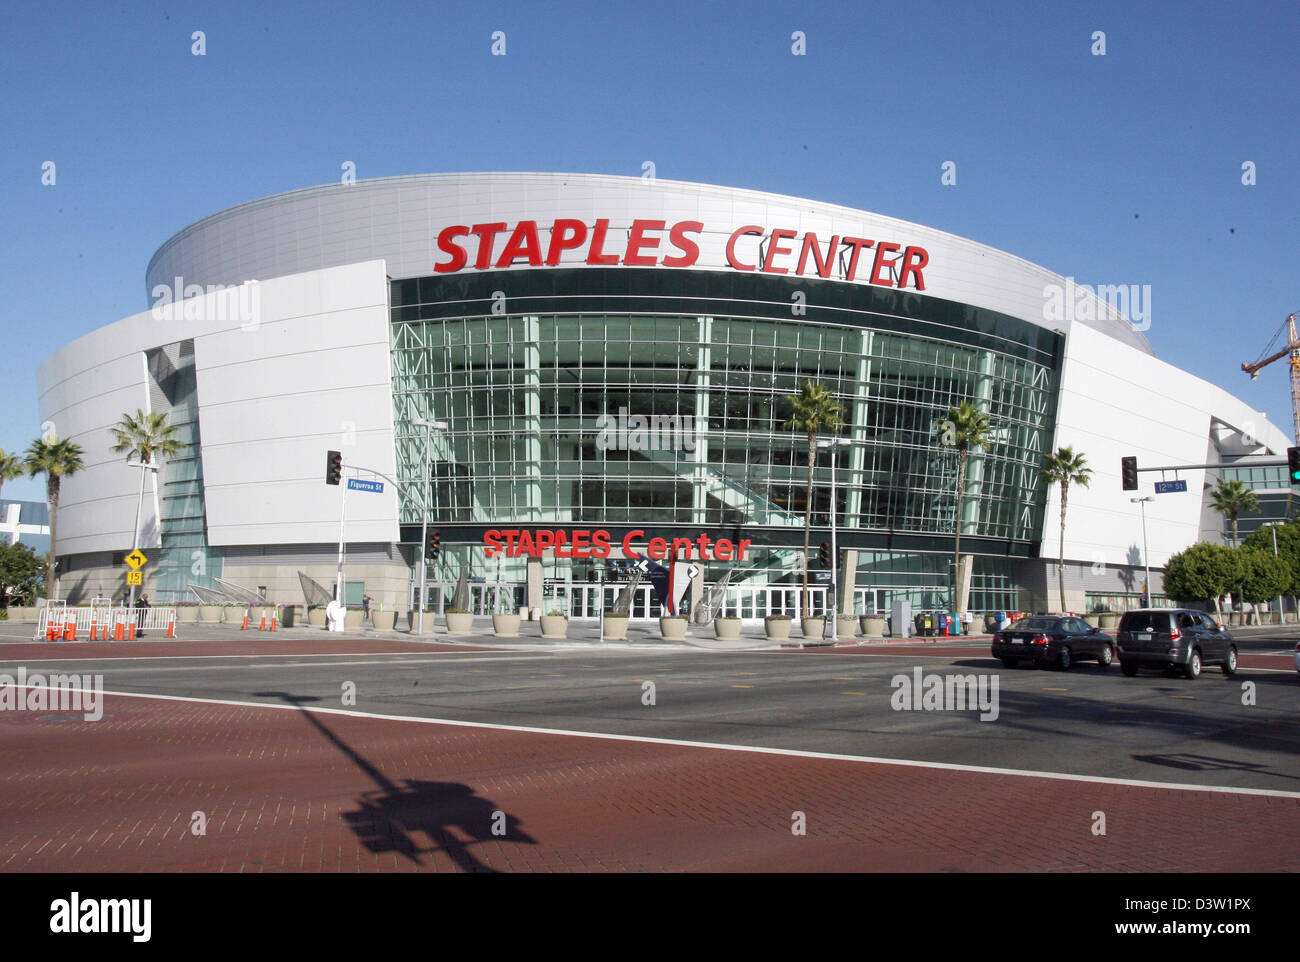 The picture shows the  Staples Center that houses among others sports events, Los Angeles, California, USA, 28 November 2006. Photo: Uli Deck Stock Photo